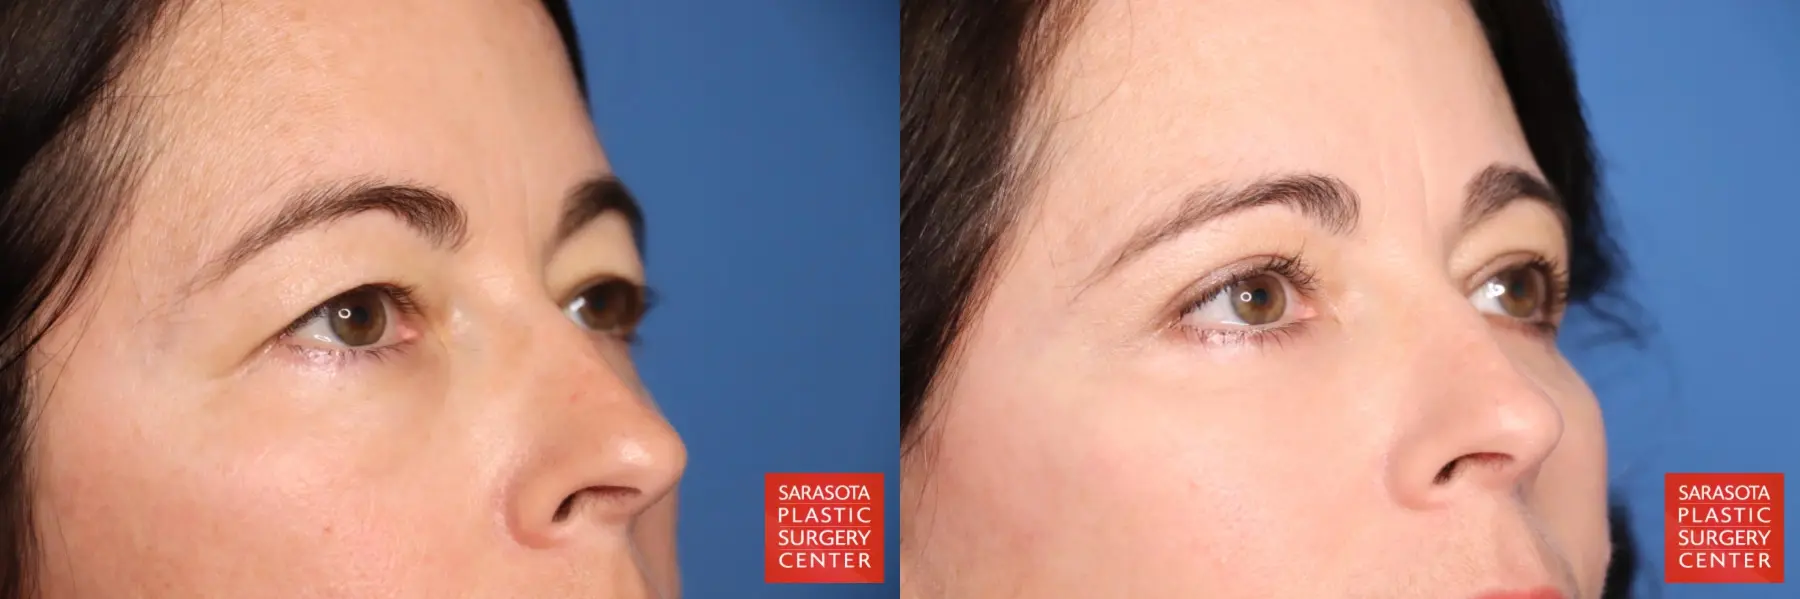 Eyelid Lift: Patient 3 - Before and After 6